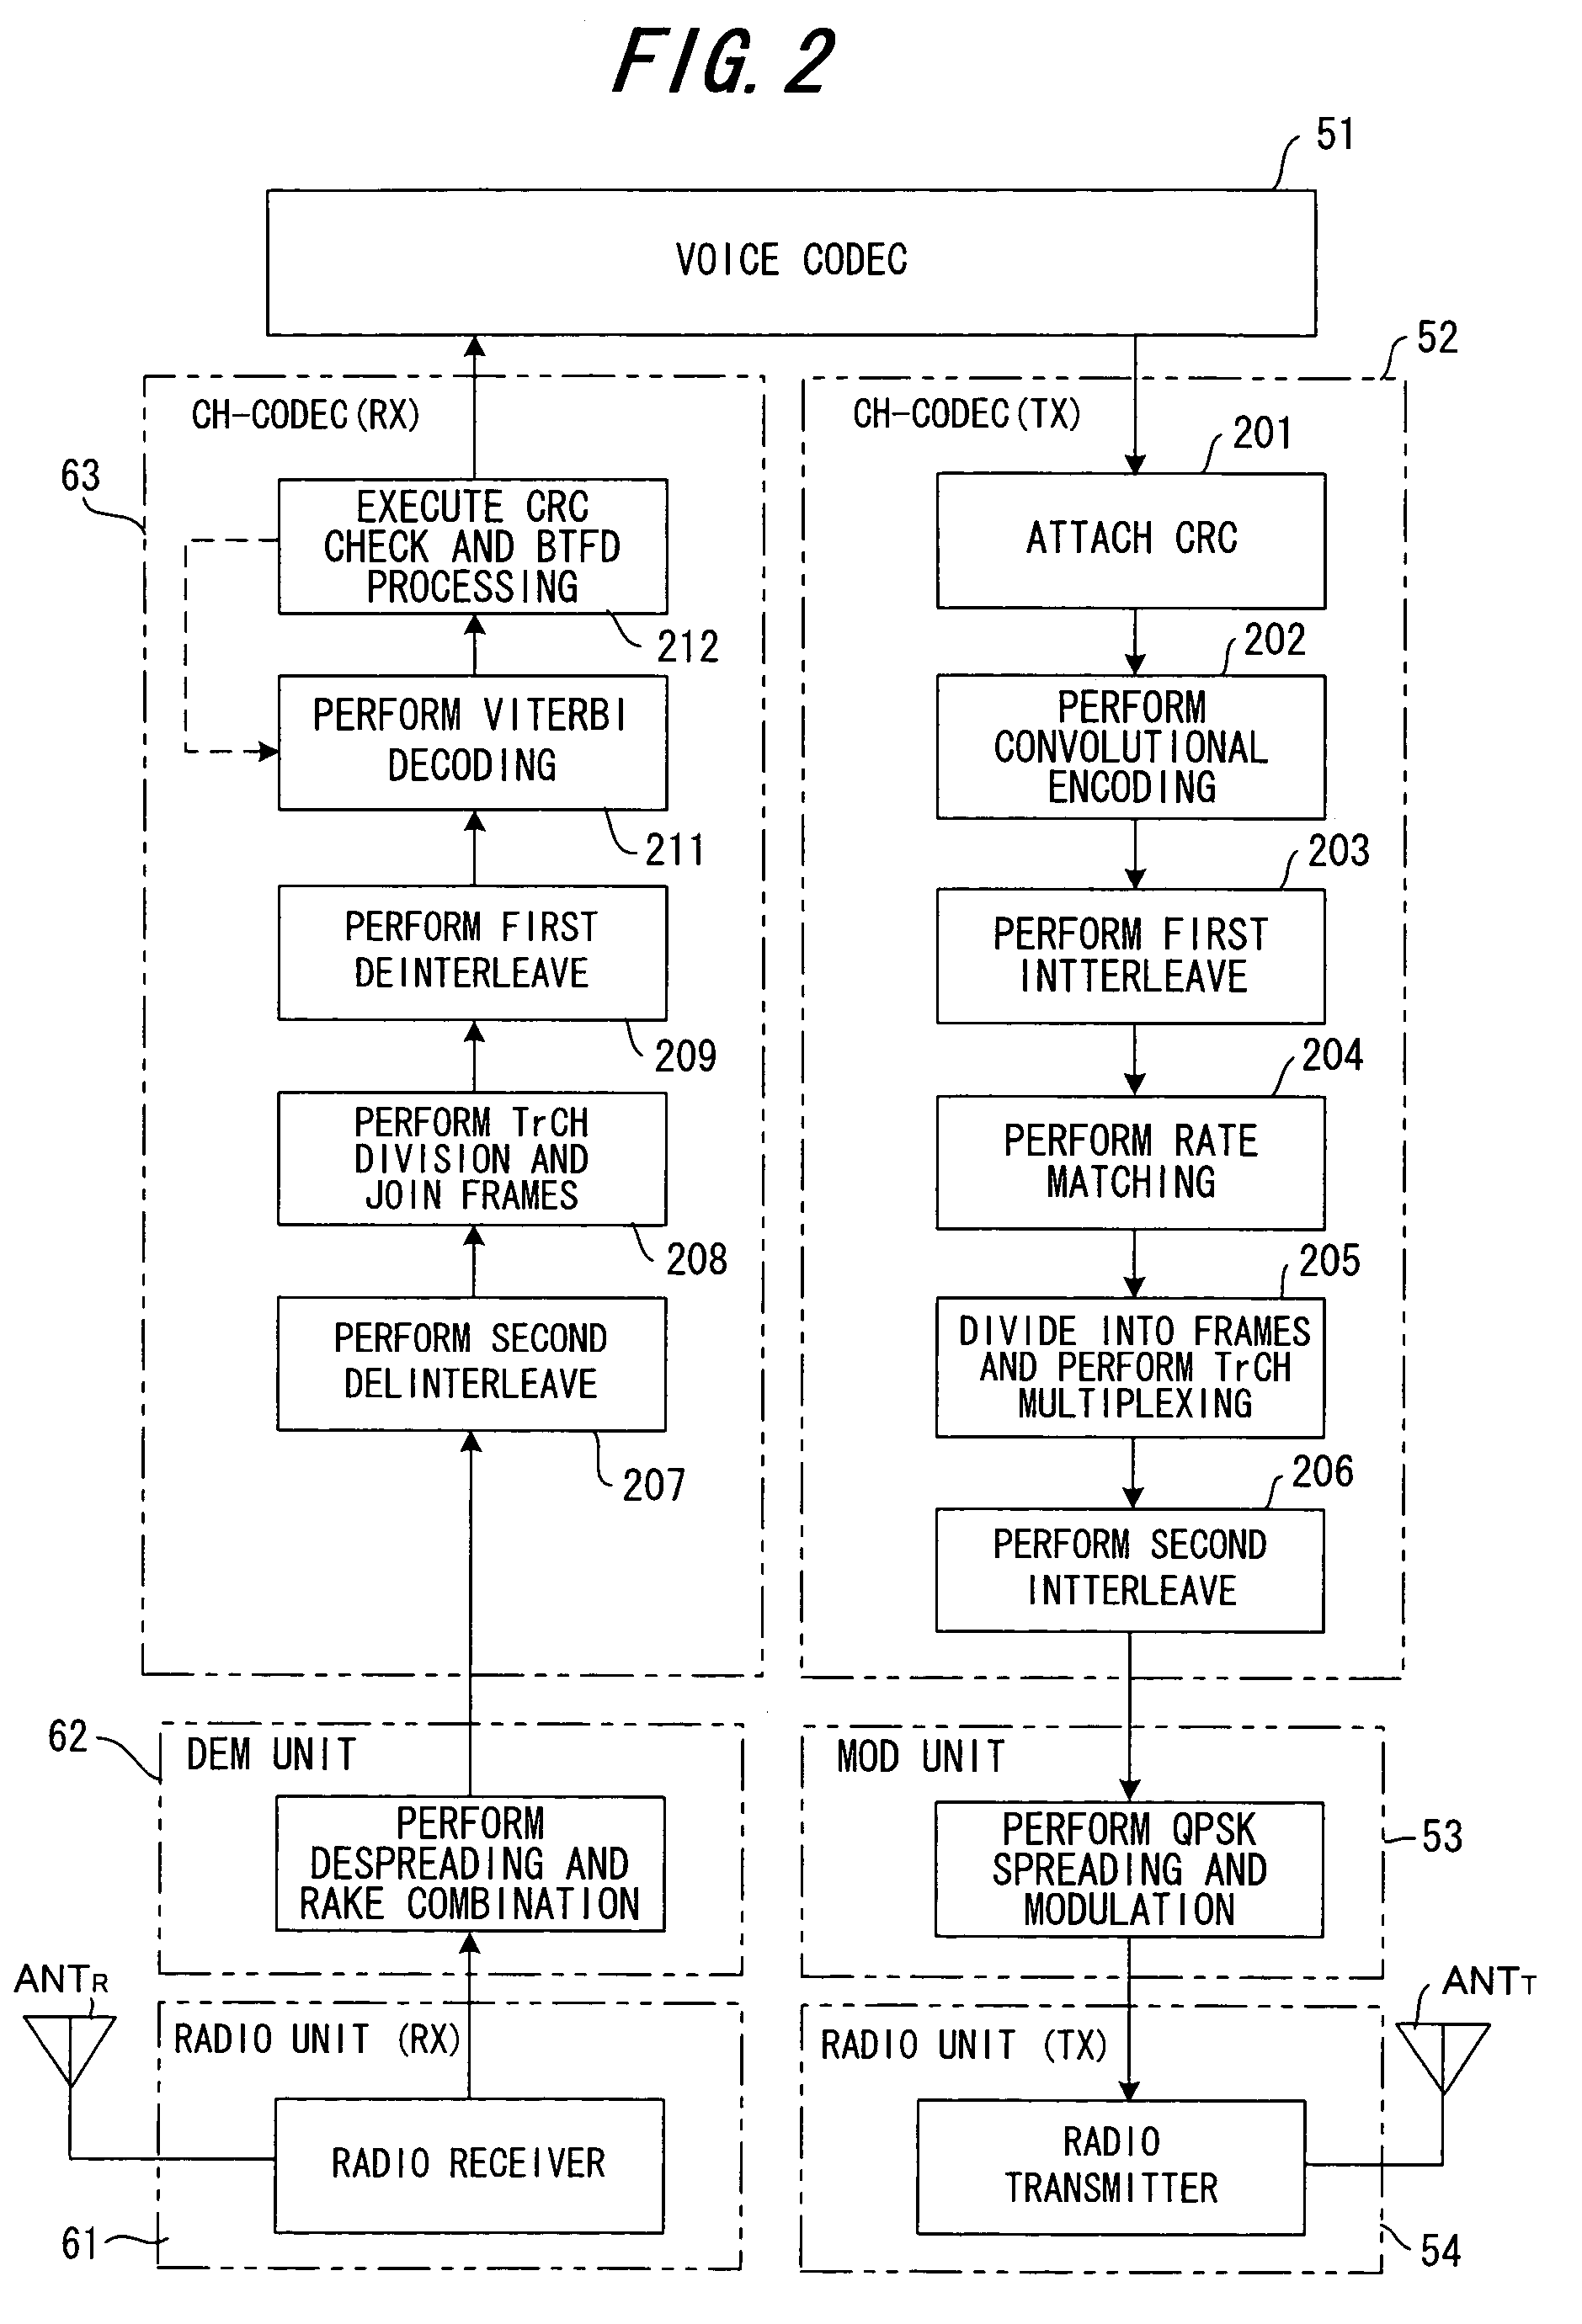 Receiving apparatus and receiving method in CDMA communication system